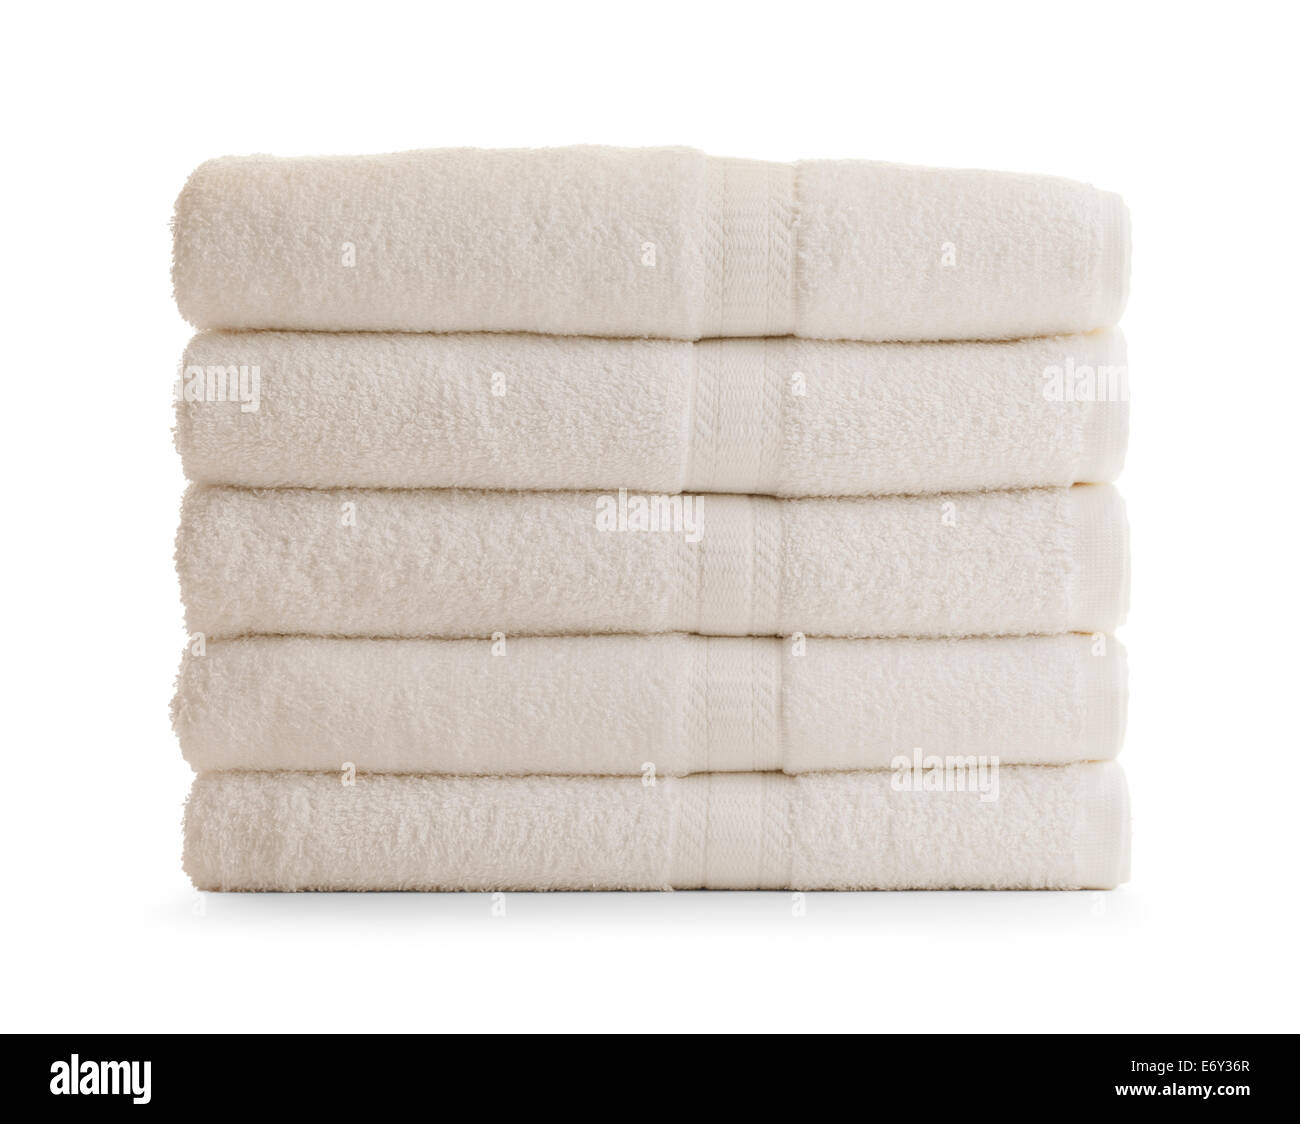 Stack of Bath Towels Isolated on White Backgrounds. Stock Photo